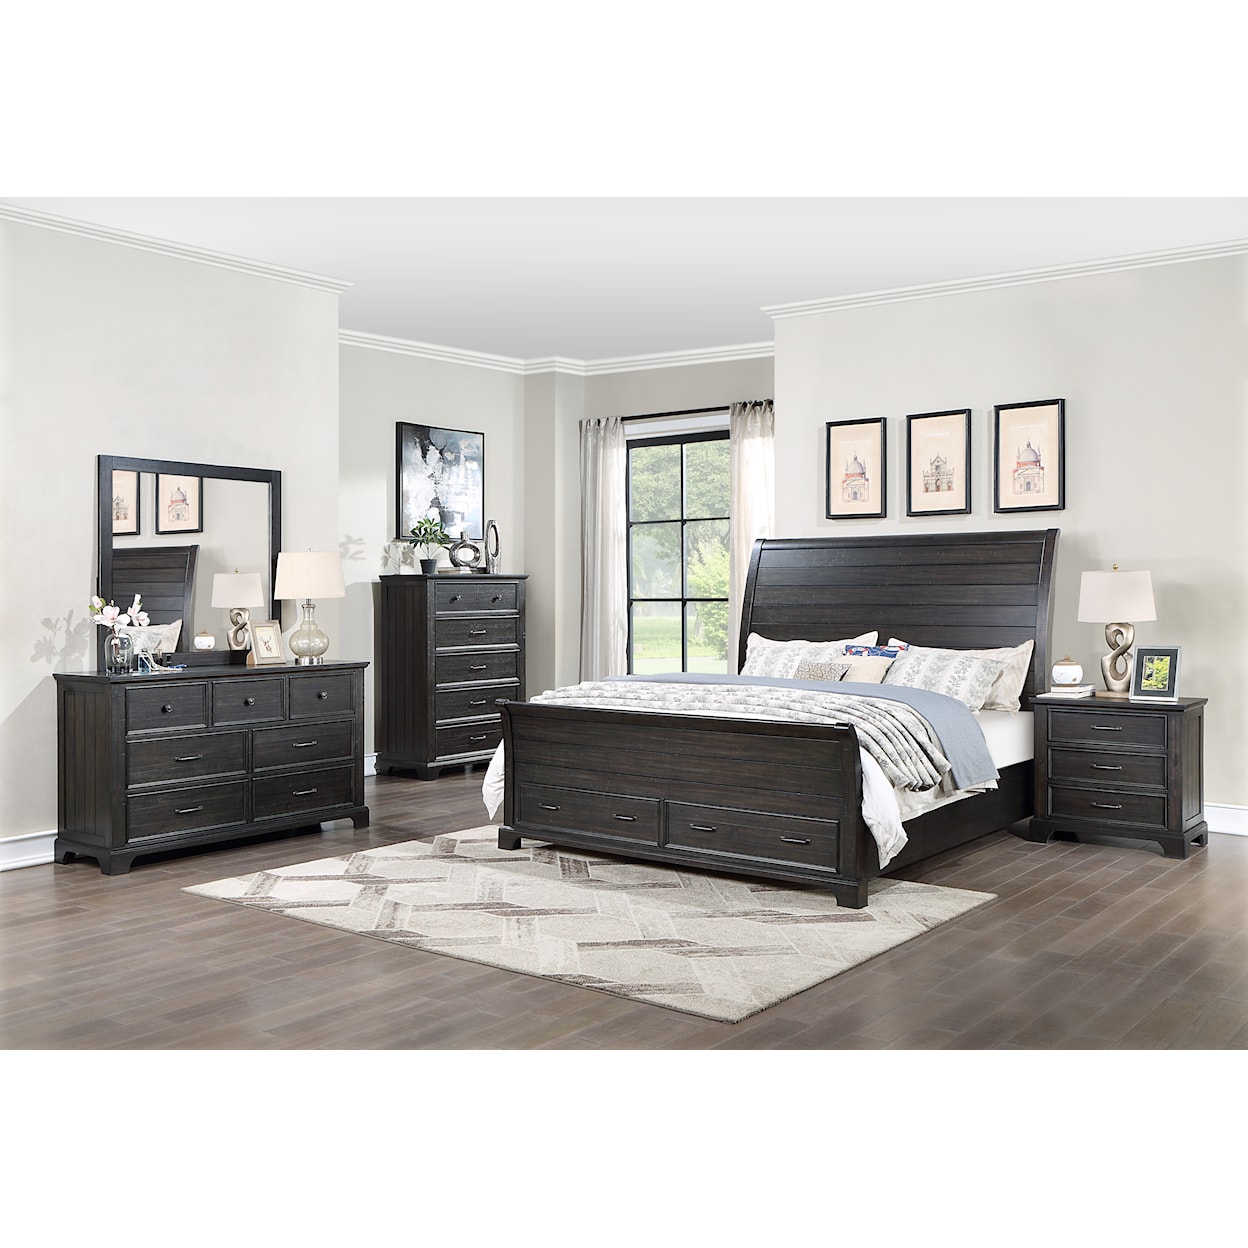 New Classic Stafford County King Bedroom Set